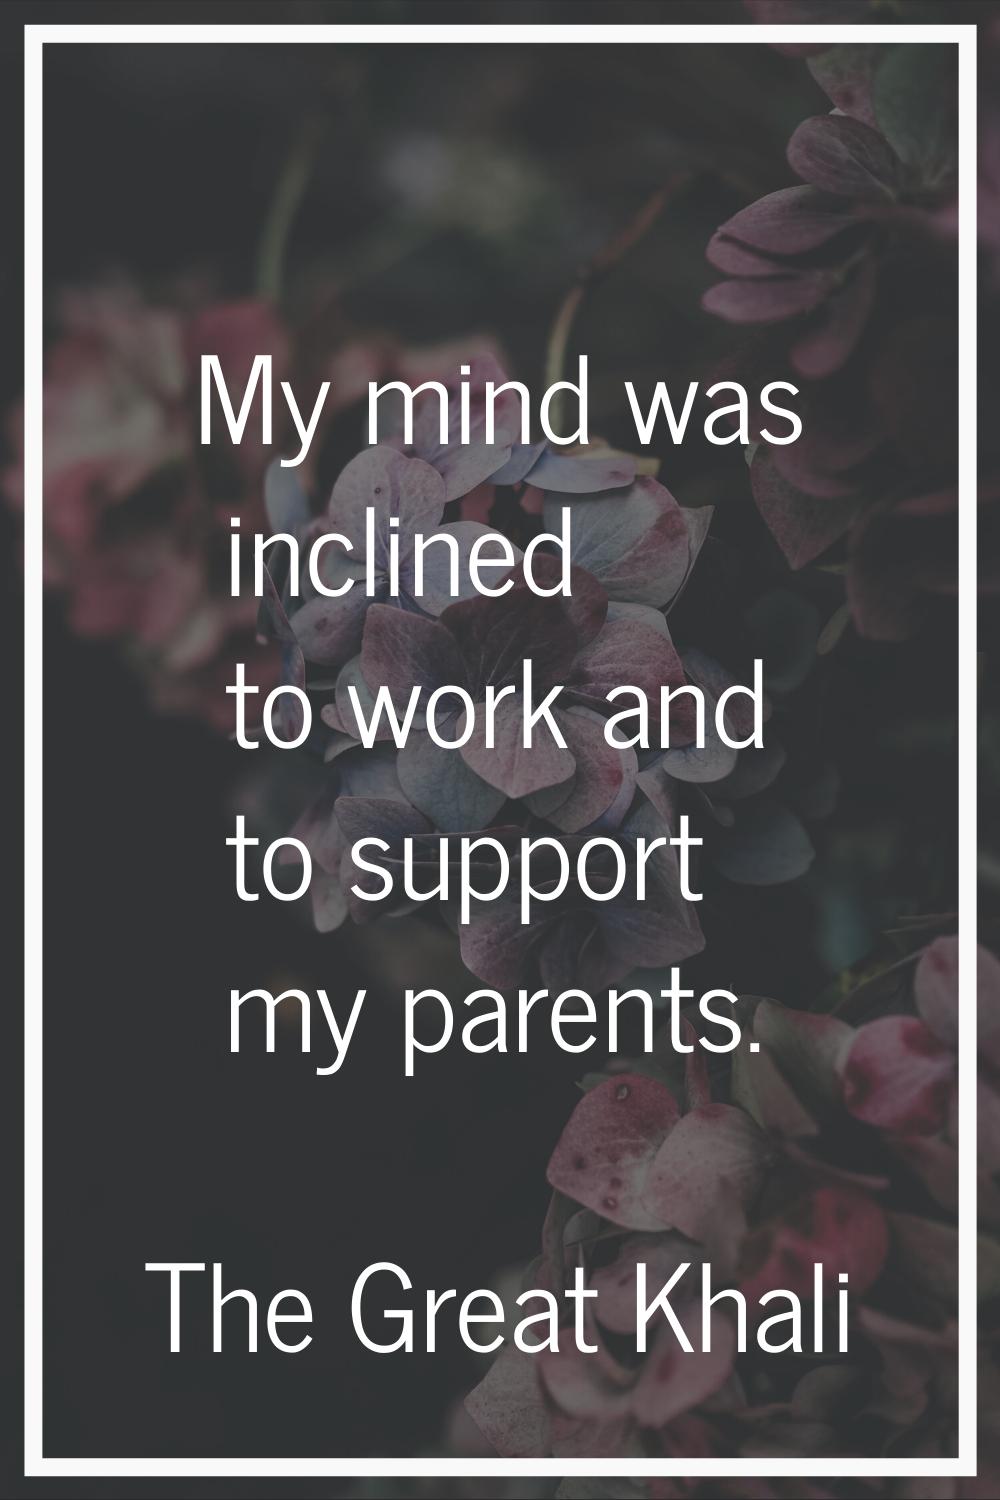 My mind was inclined to work and to support my parents.